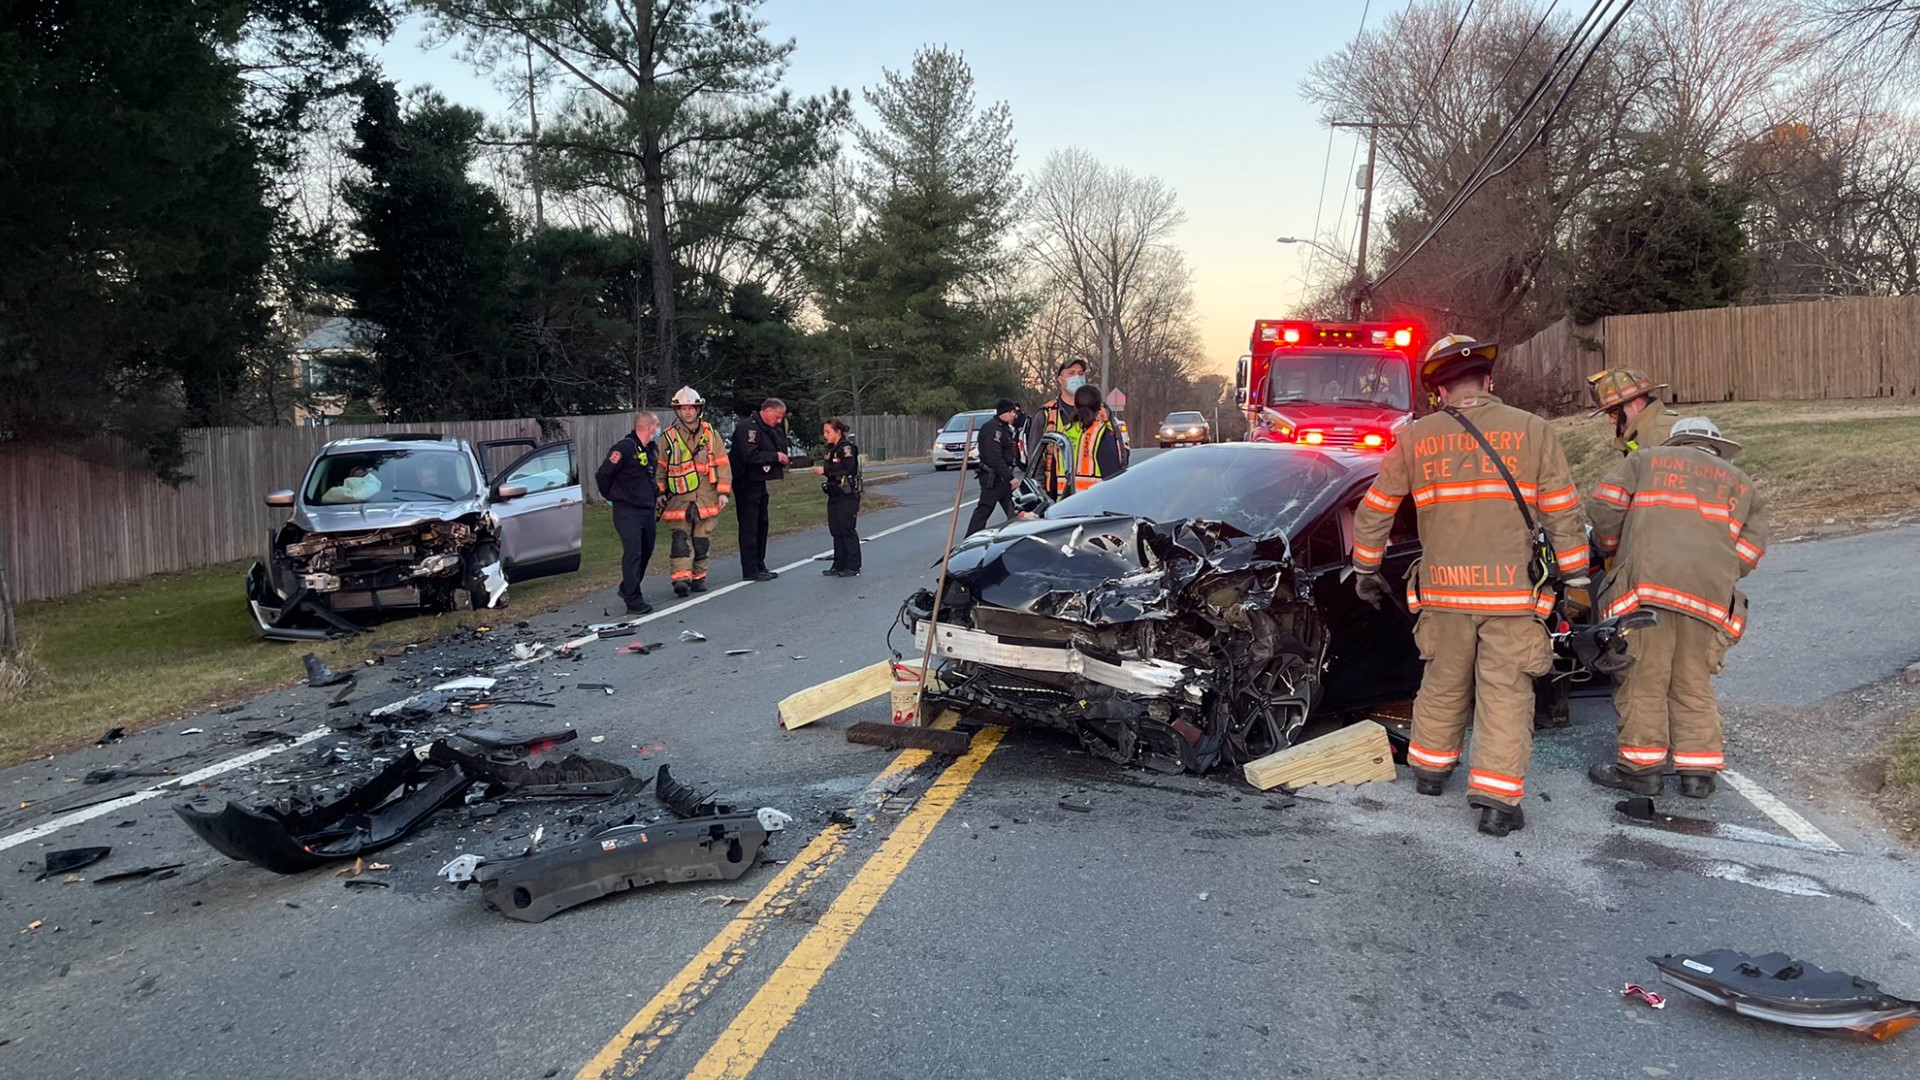 A man has died, and two people were injured after two cars collided, causing lane closures for an extended period of time early Sunday morning in Rockville, Maryland